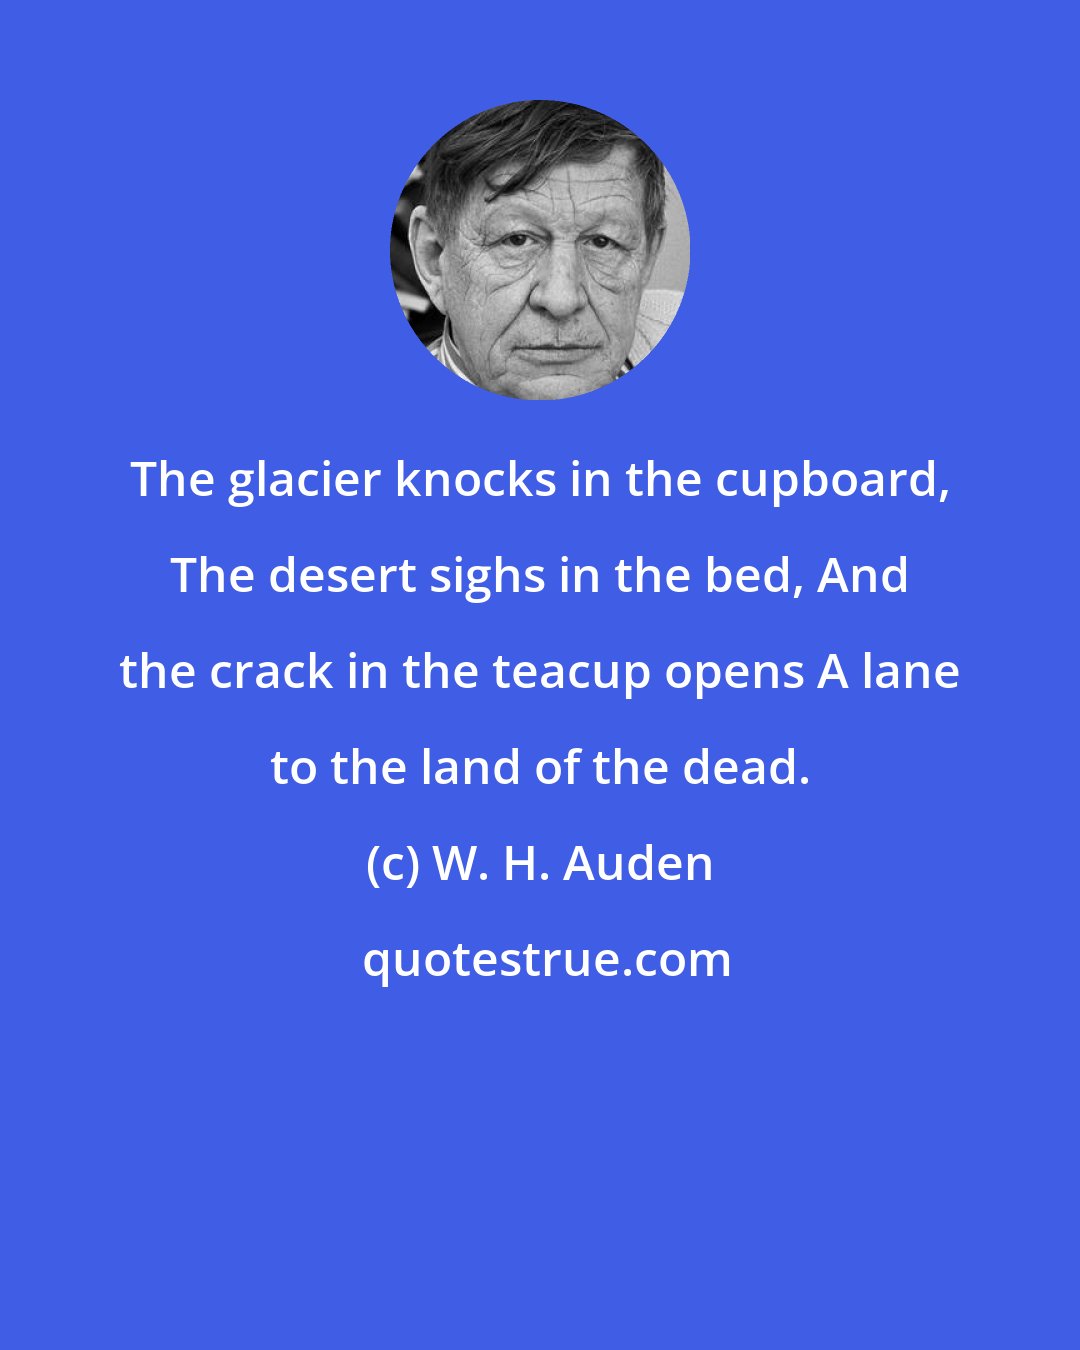 W. H. Auden: The glacier knocks in the cupboard, The desert sighs in the bed, And the crack in the teacup opens A lane to the land of the dead.